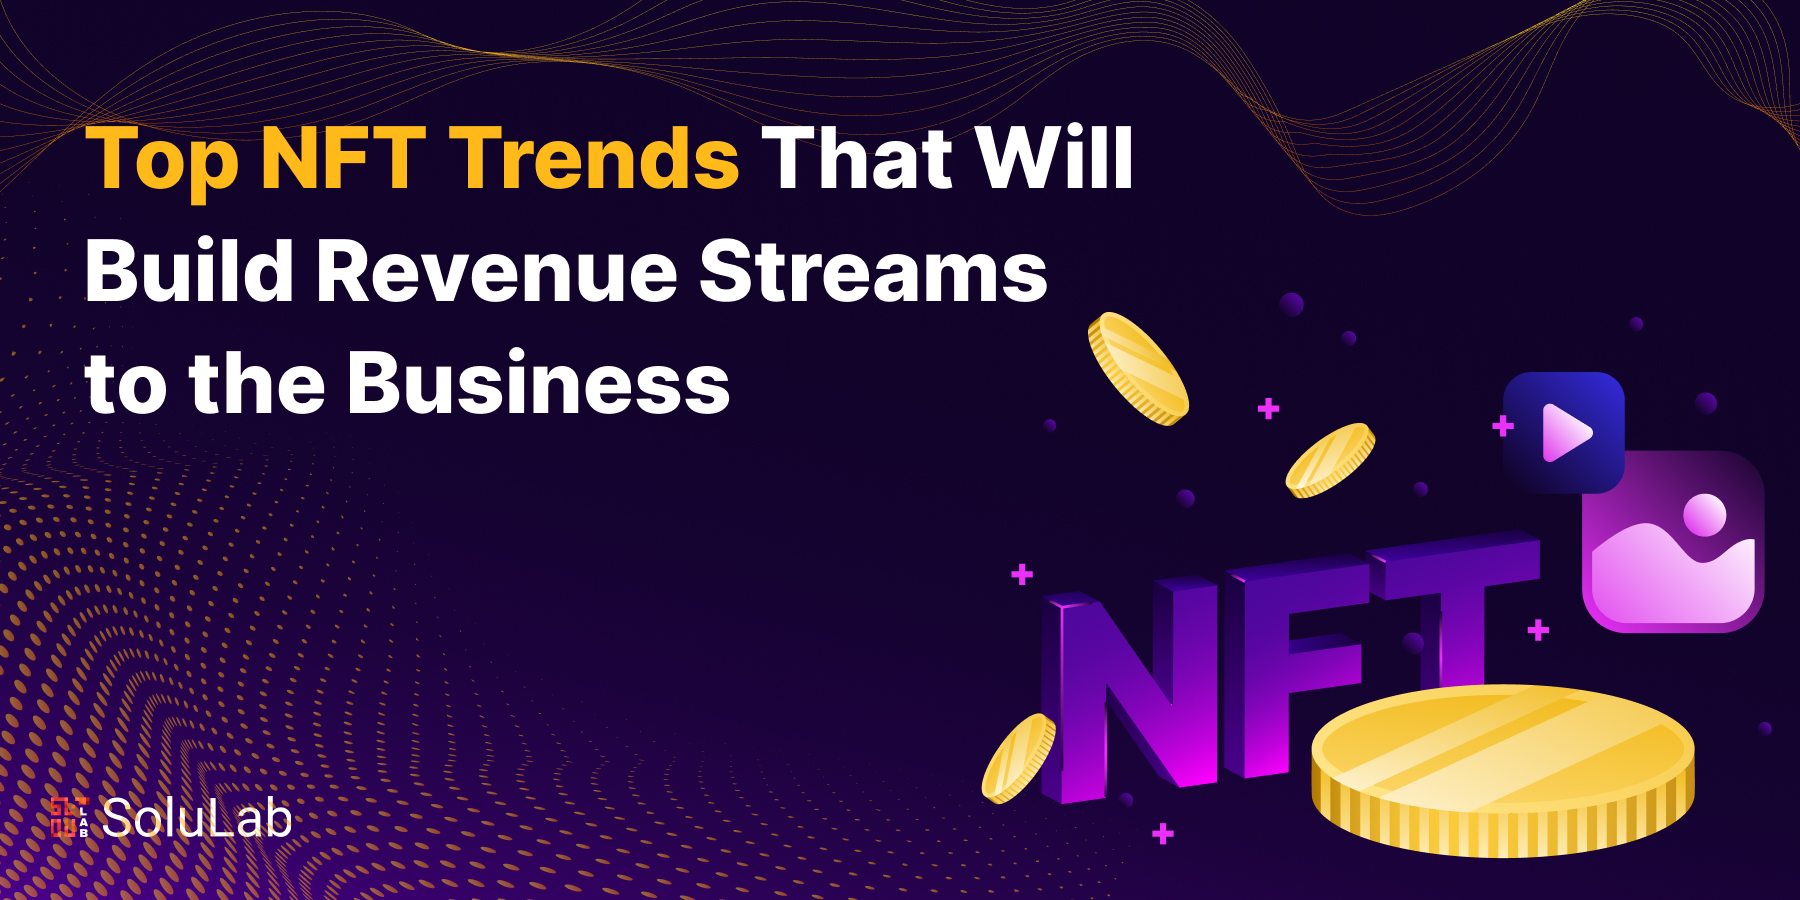 Top NFT Trends That Will Build Revenue Streams to the Business